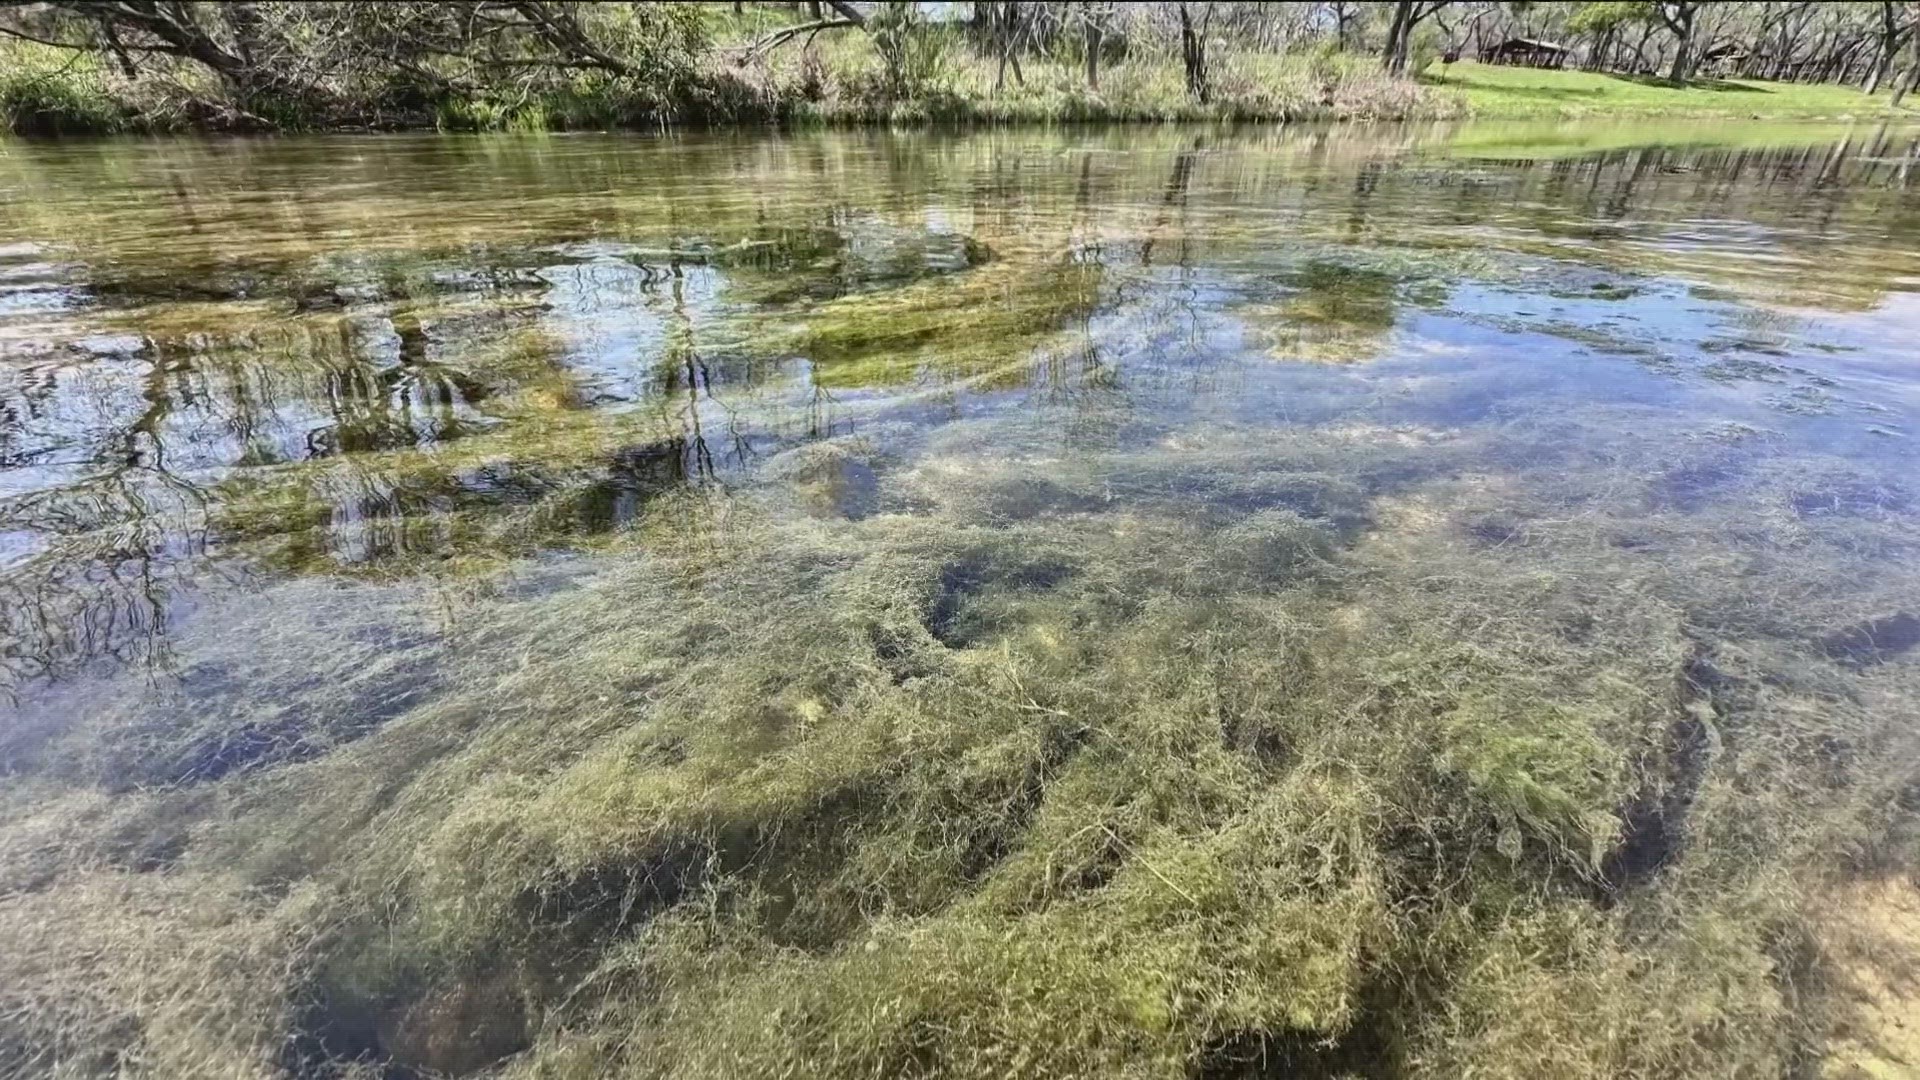 On Thursday, state environmental regulators weighed in on a years-long dispute involving the cause of excessive algae growth in the South San Gabriel River in Willia